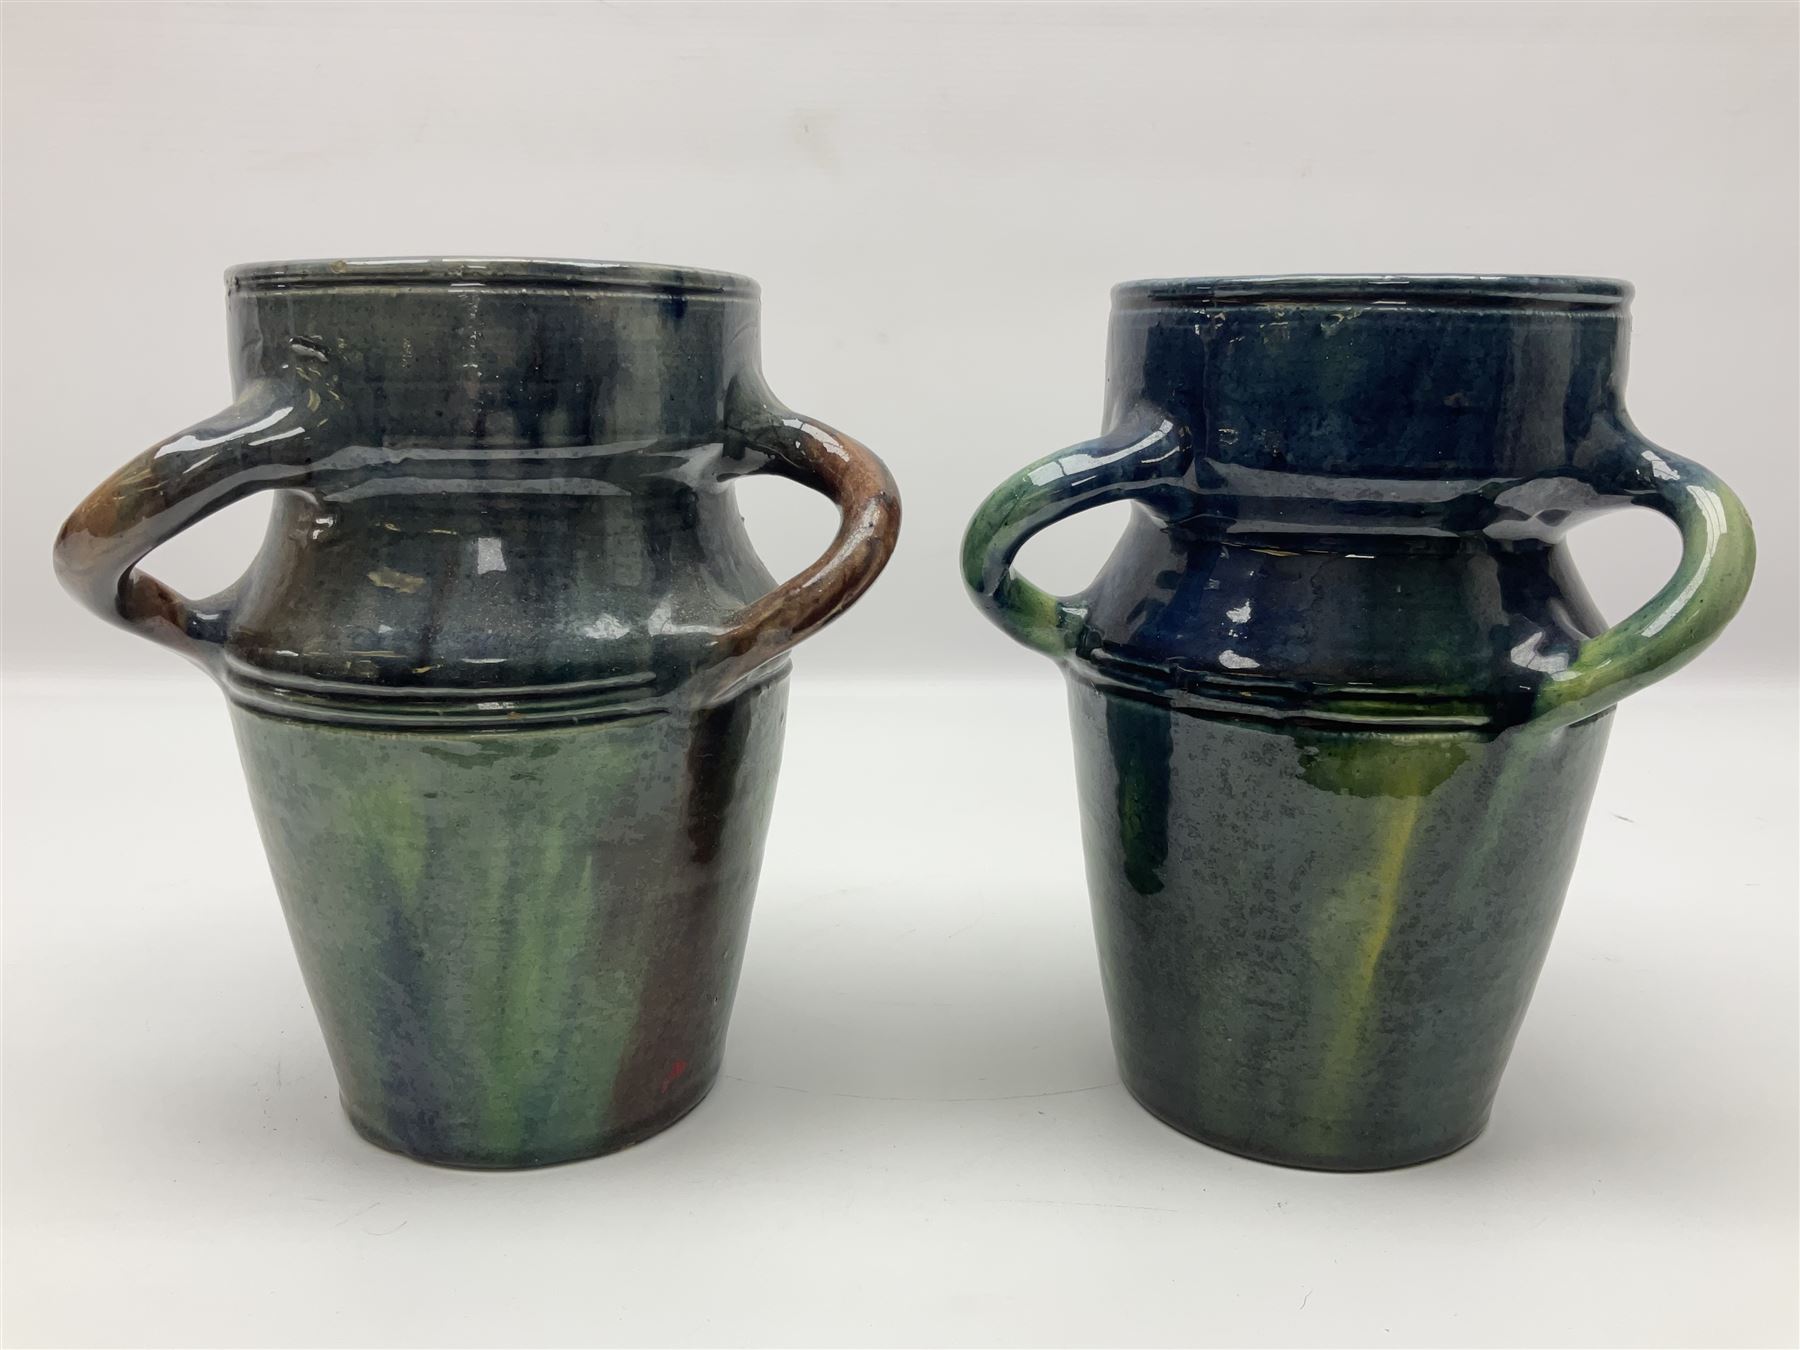 Pair of Art Nouveau style vases - Image 2 of 7